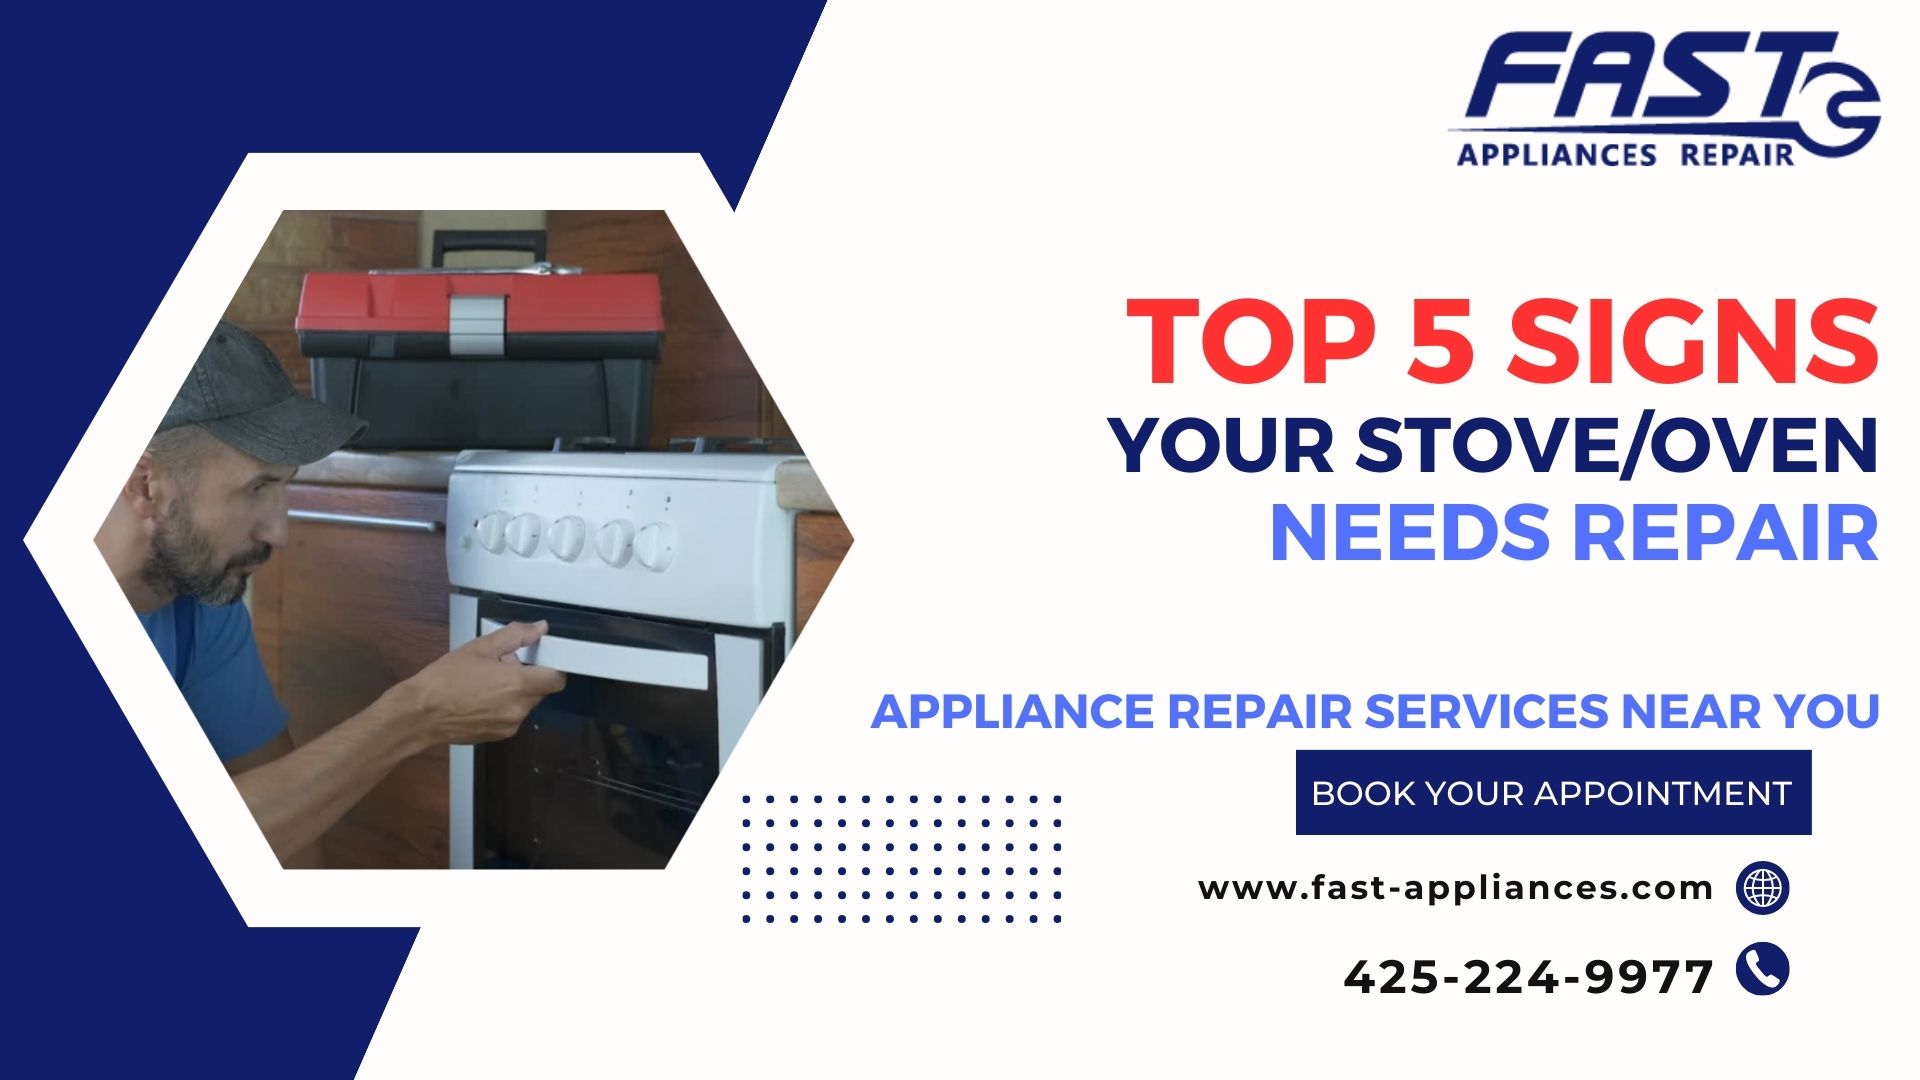 top 5 signs your stove, oven or cooking range needs repair - Fast Appliances Repair